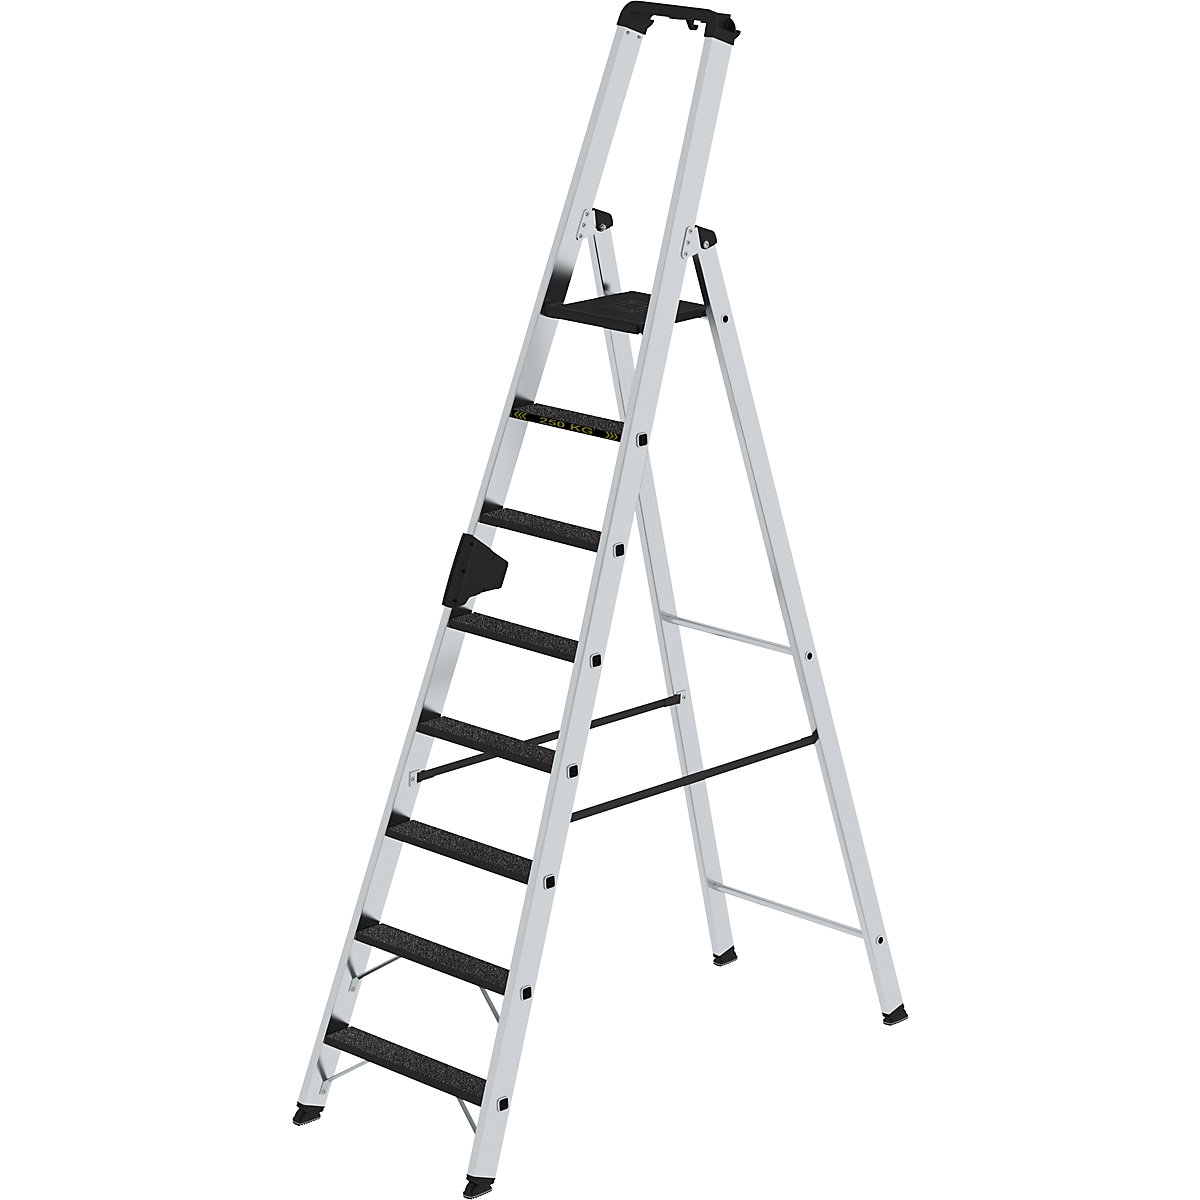 CLIP-STEP step ladder – MUNK, single sided access, slip resistant R13, durable, 8 steps-12